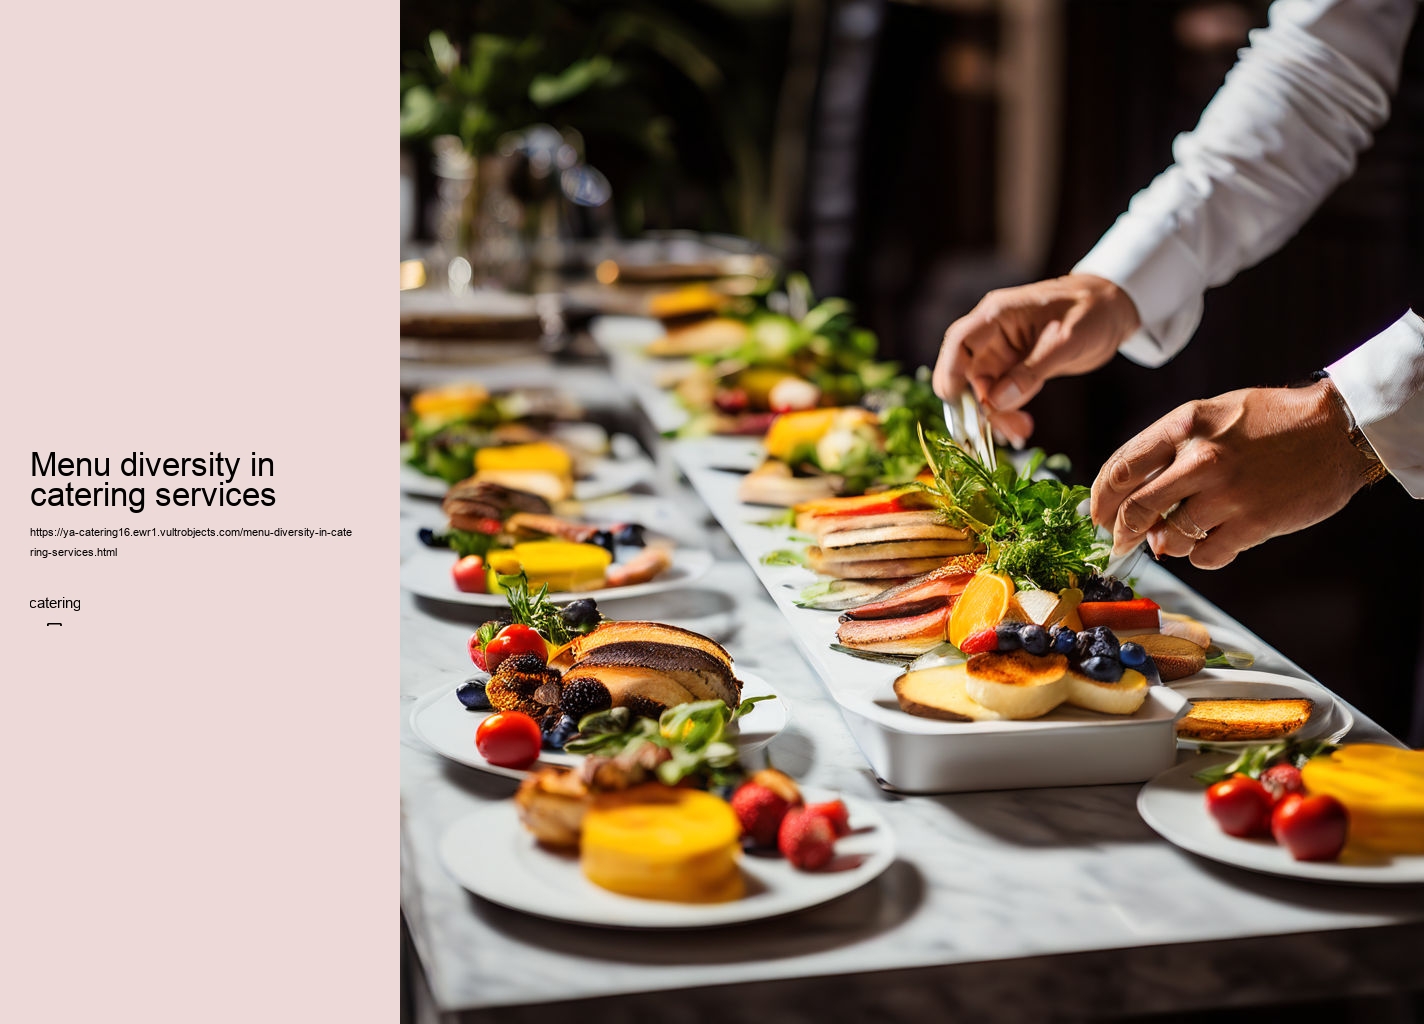 Menu diversity in catering services